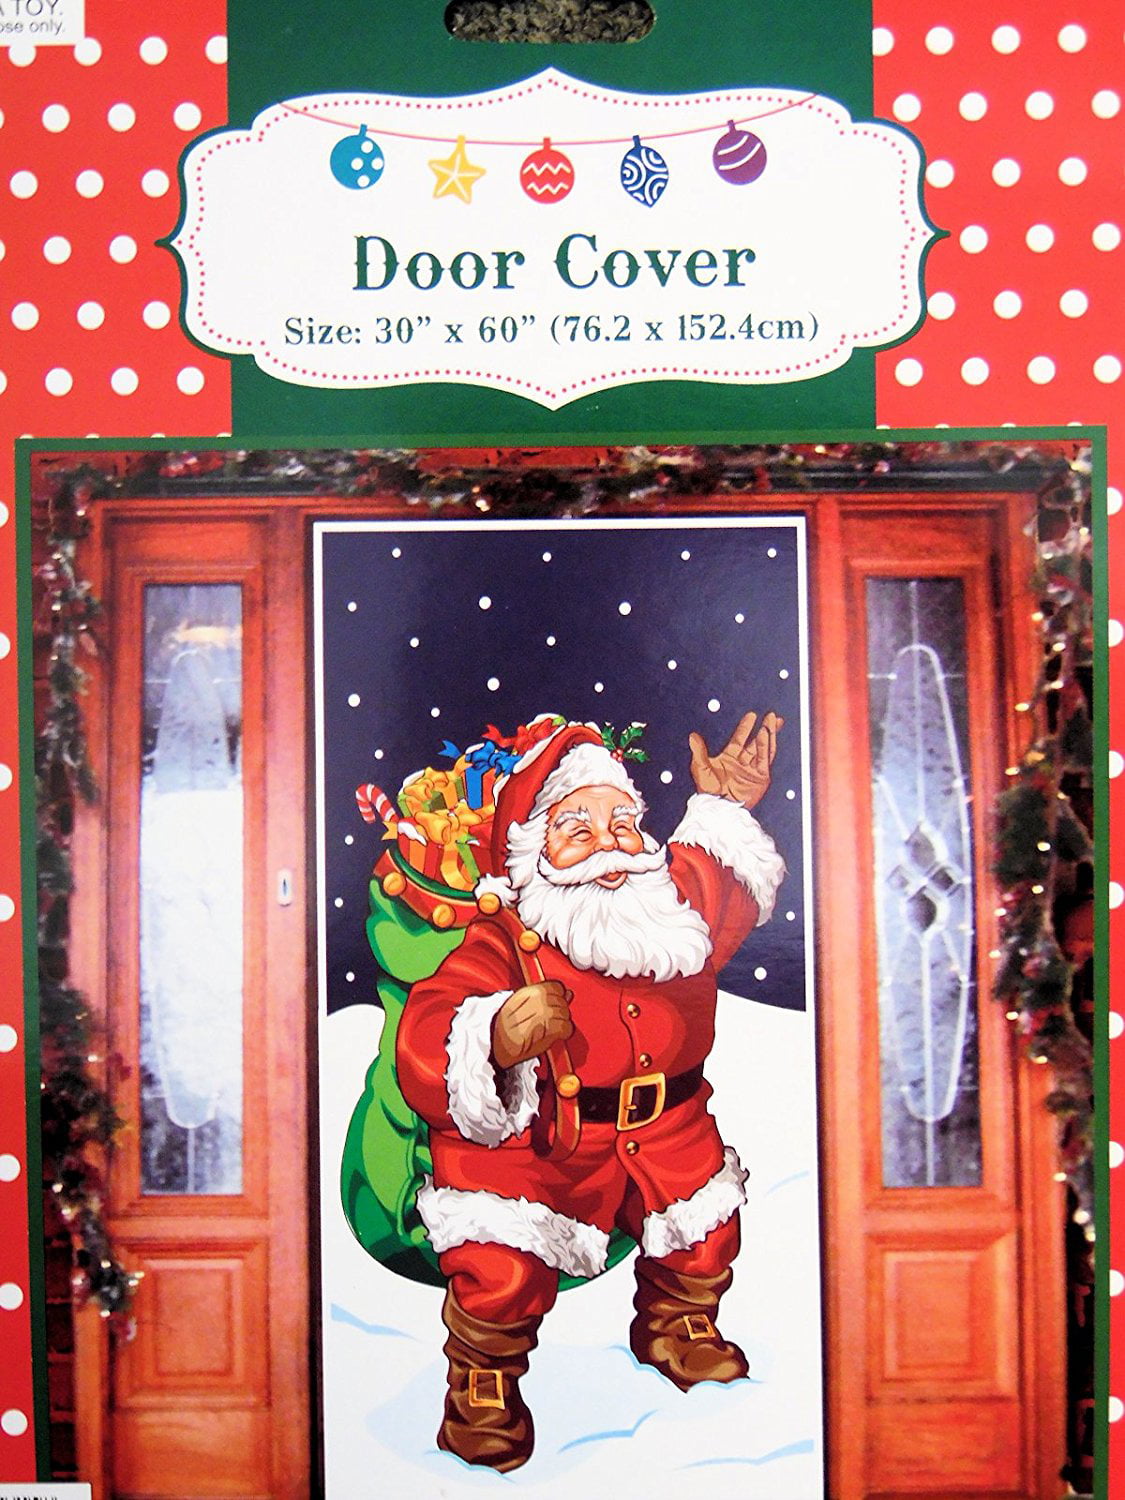 Happy Holidays Door Cover 76 x 152 cm Christmas Present Party Decorations 